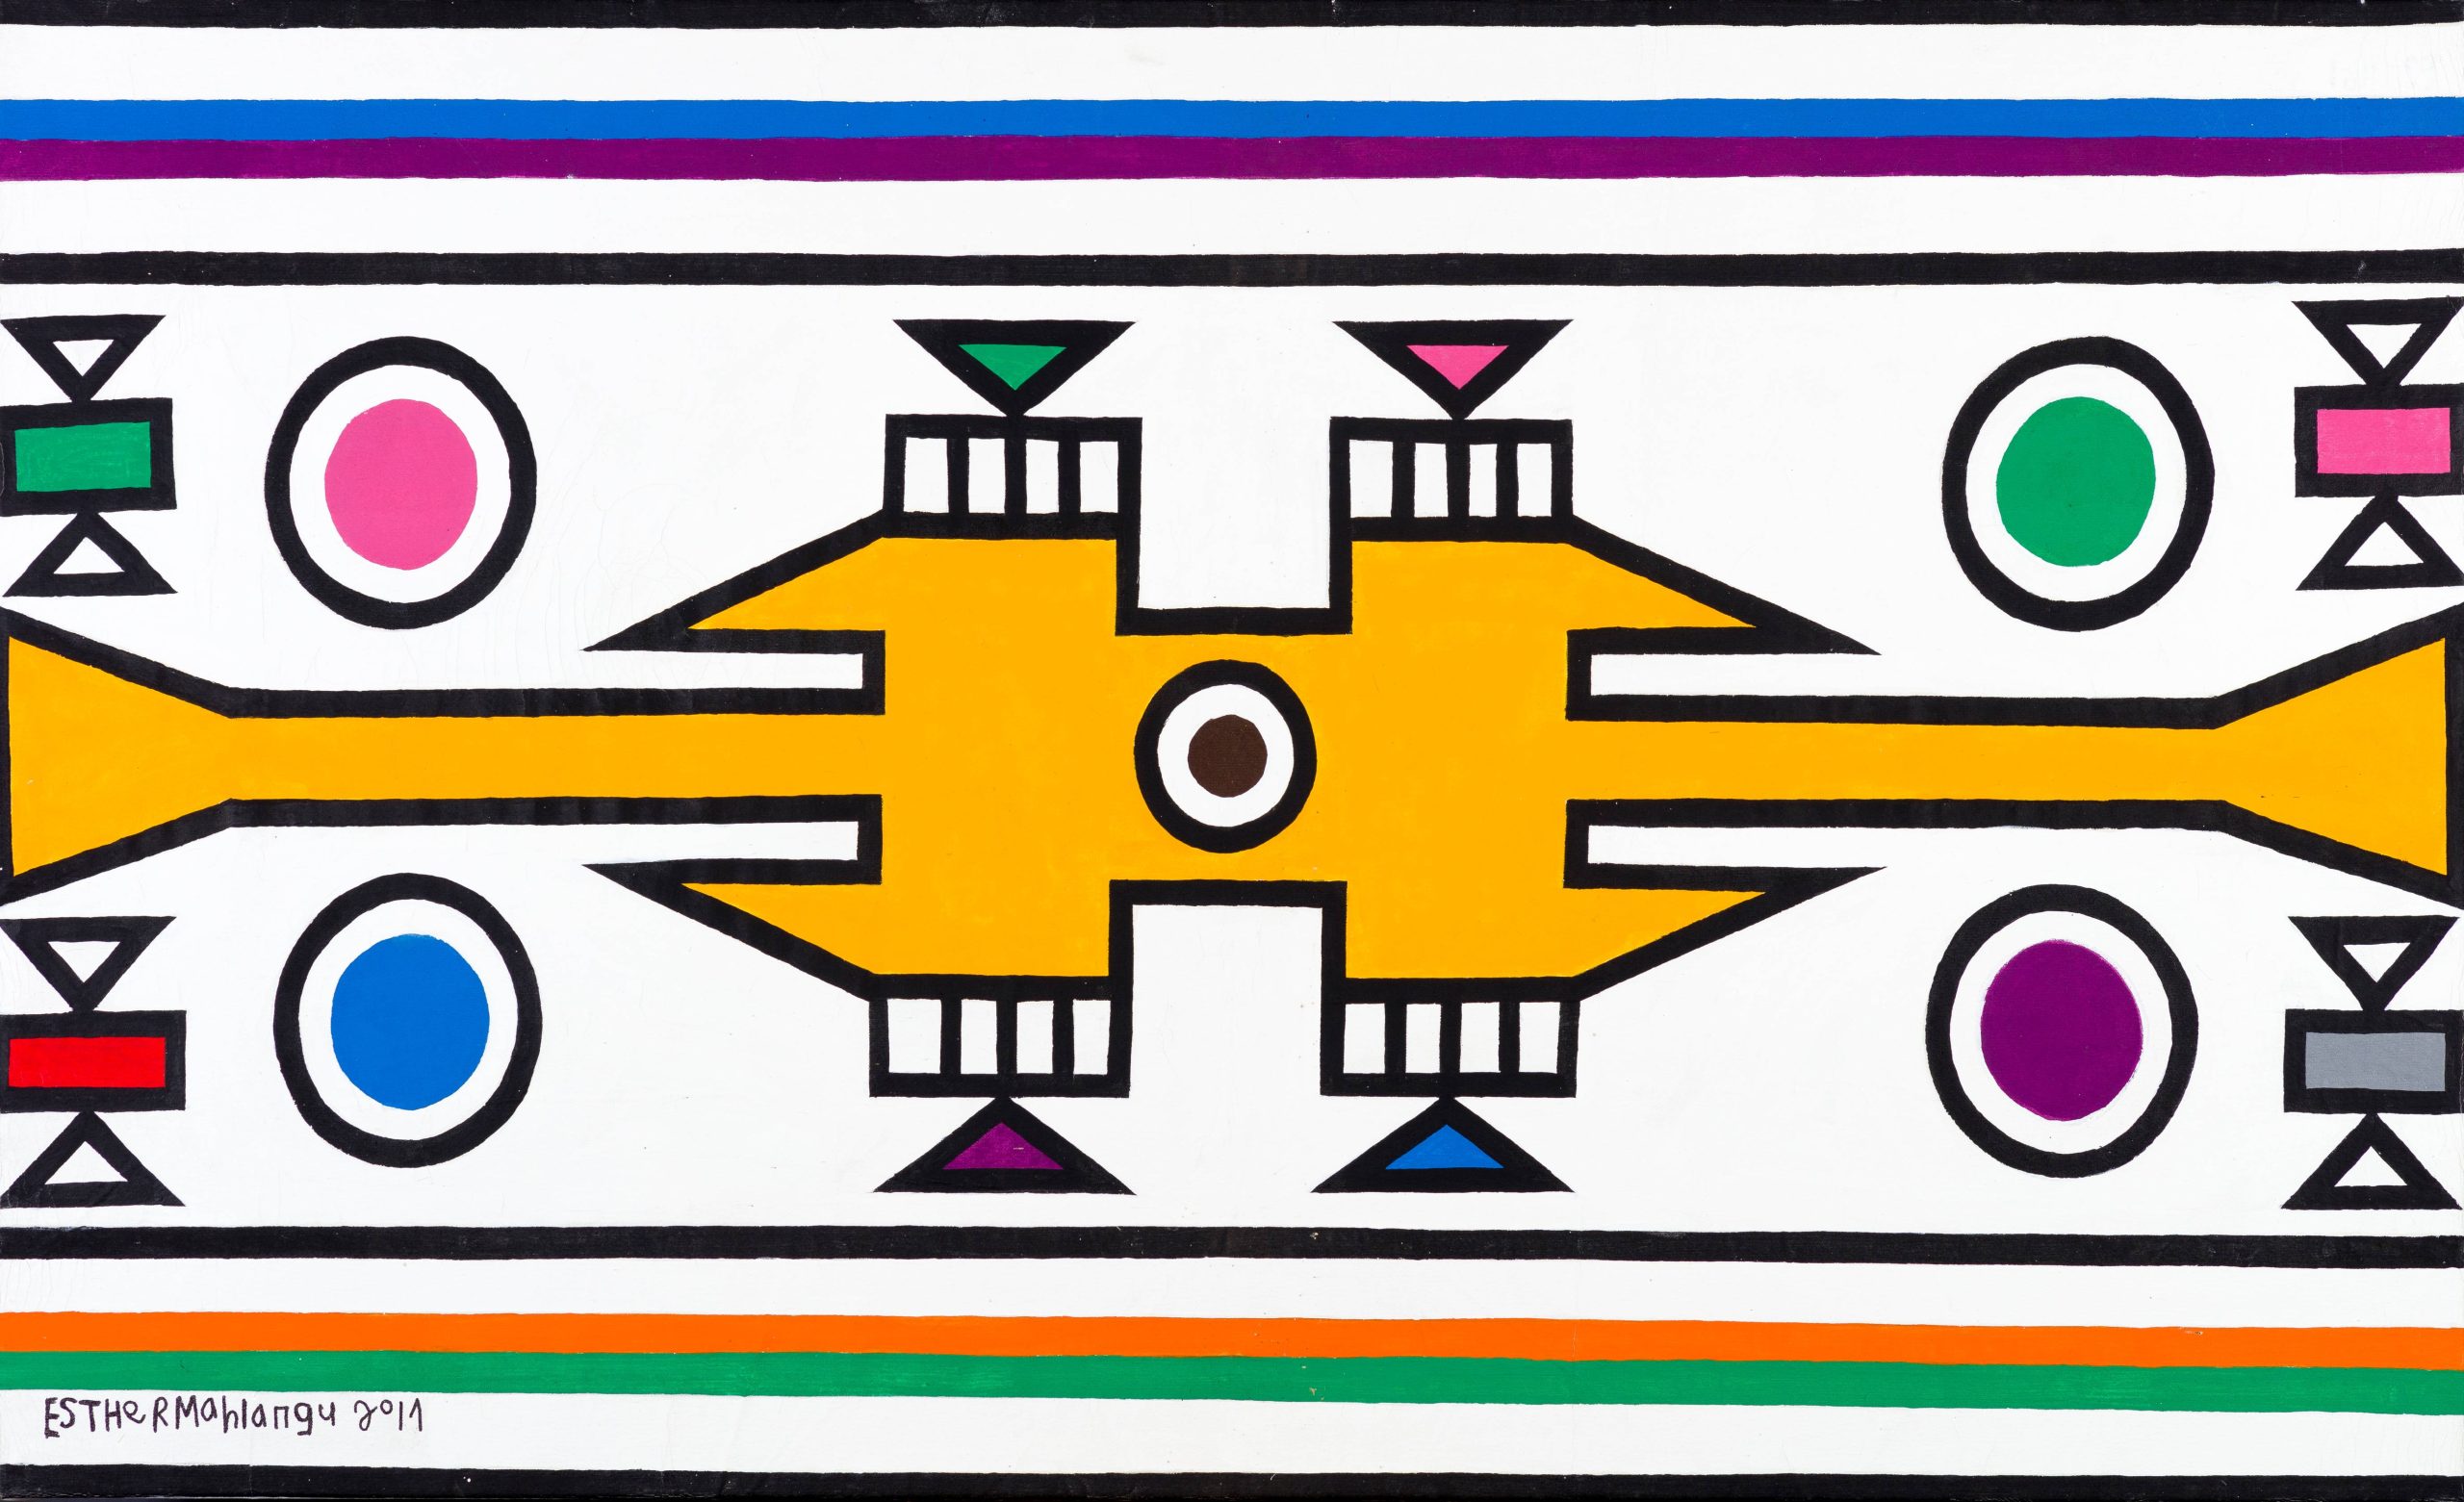 Then I Knew I Was Good at Painting: Esther Mahlangu, A Retrospective - Ndebele Abstract (2017 | Acrylic on canvas | 96 x 168 cm)